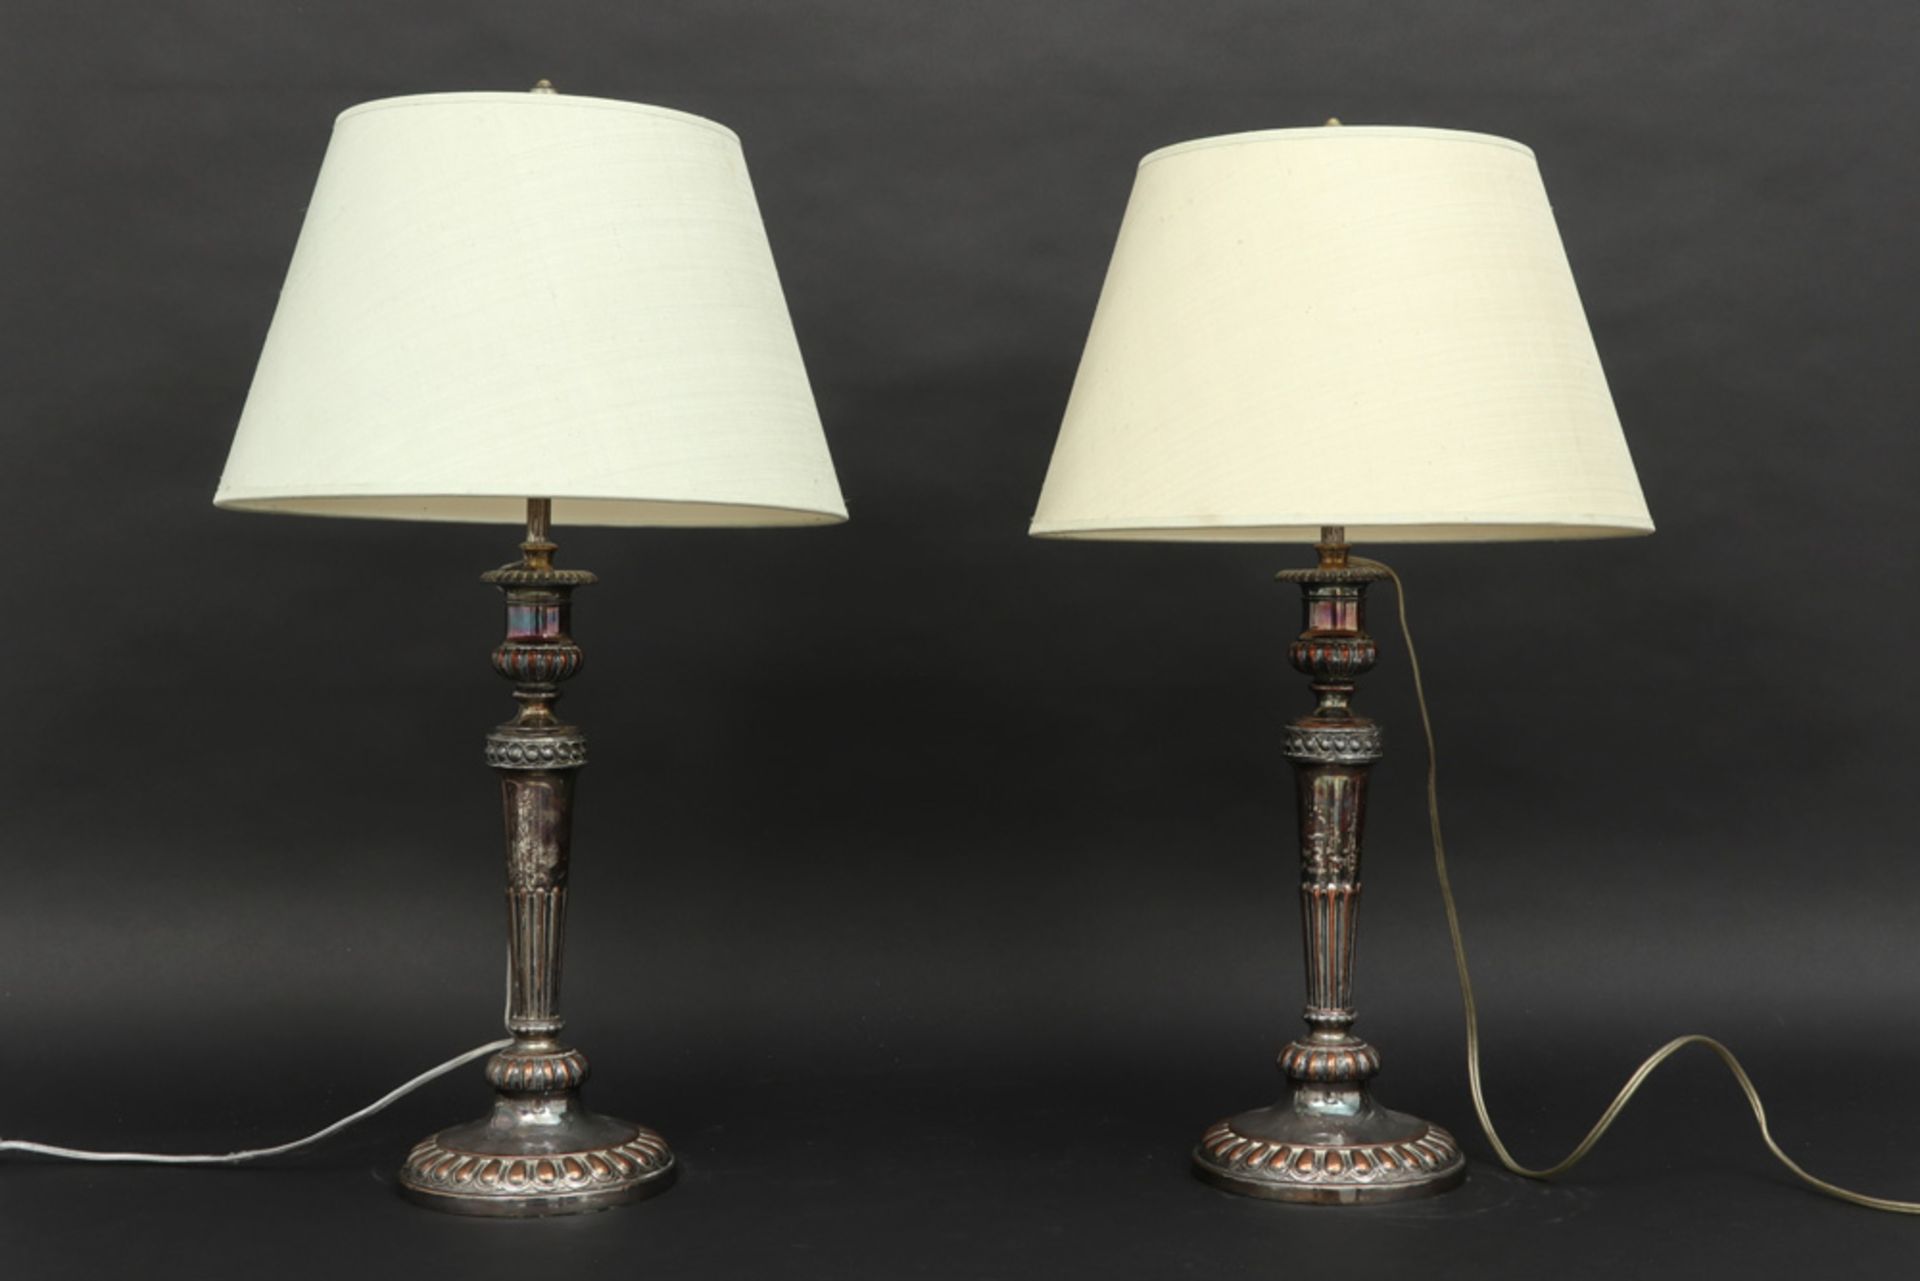 pair of antique "Sheffield" candlesticks made into lamps